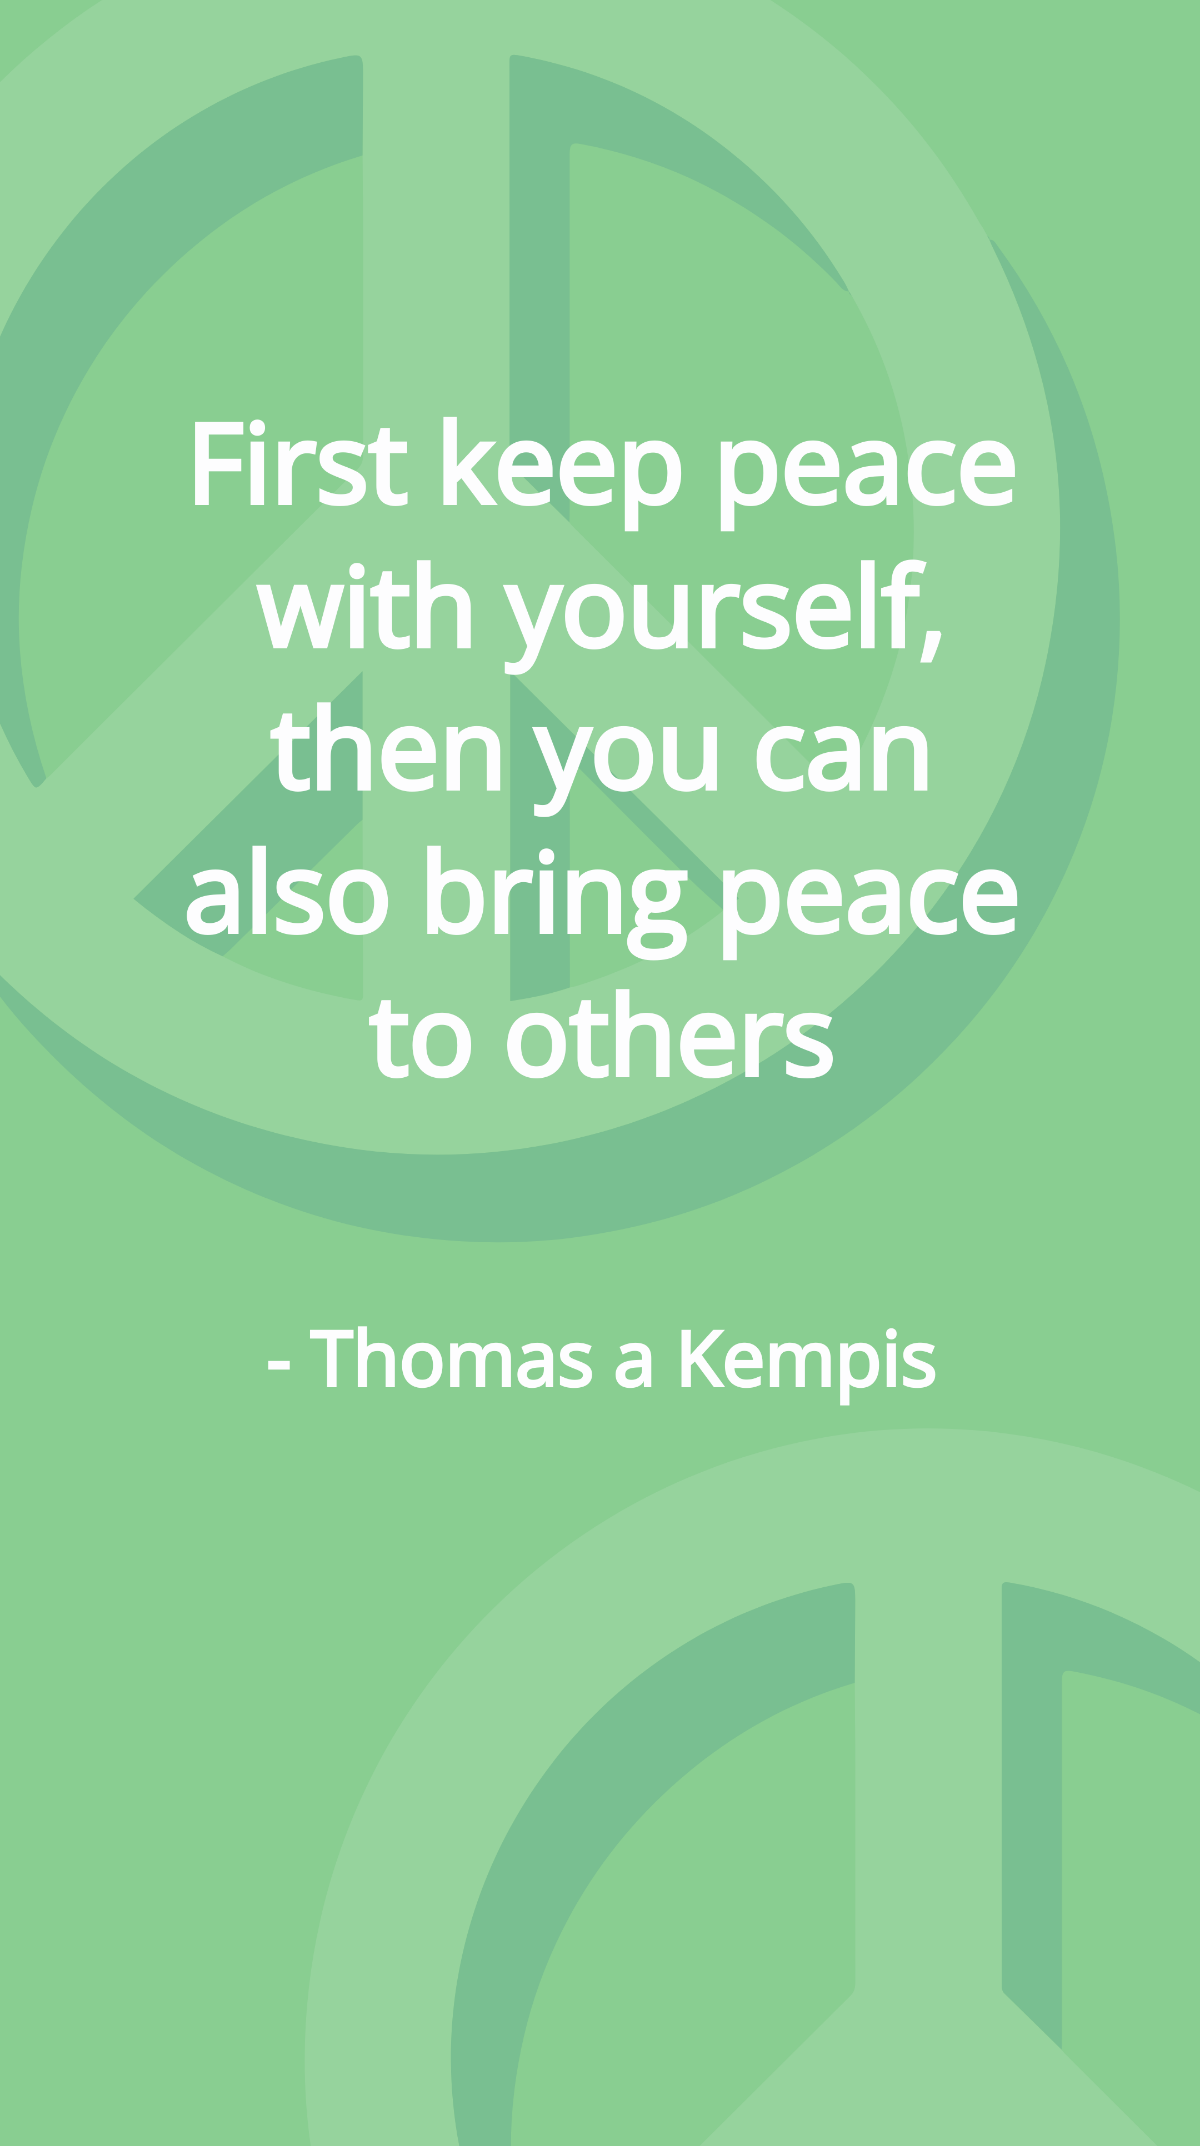 Free Thomas a Kempis - First keep peace with yourself, then you can also bring peace to others Template